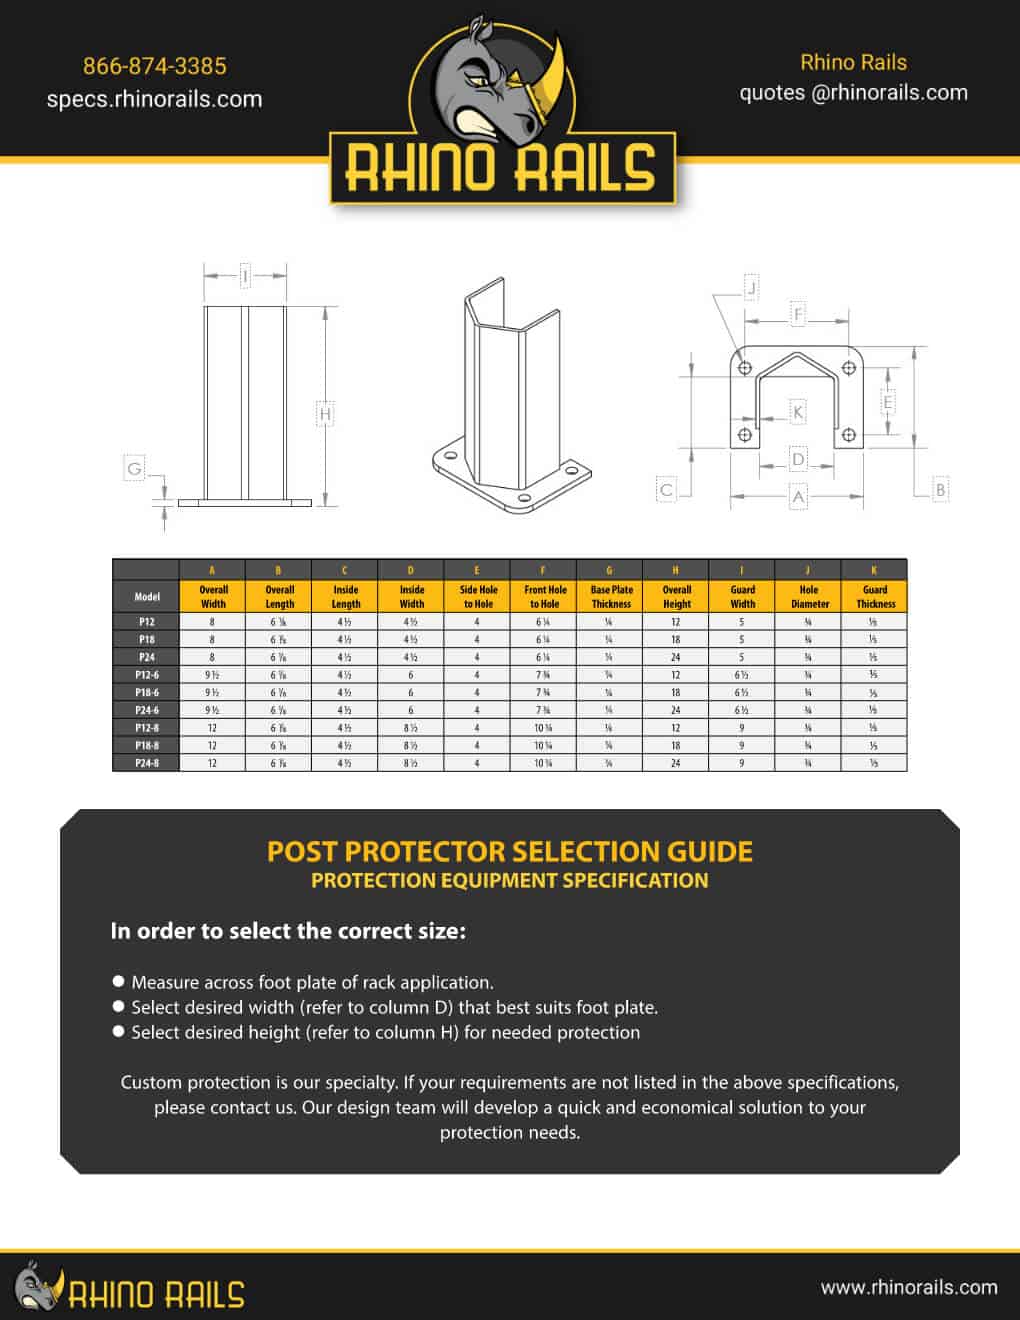 Post Protector - Product Information Sheet - Photo 2